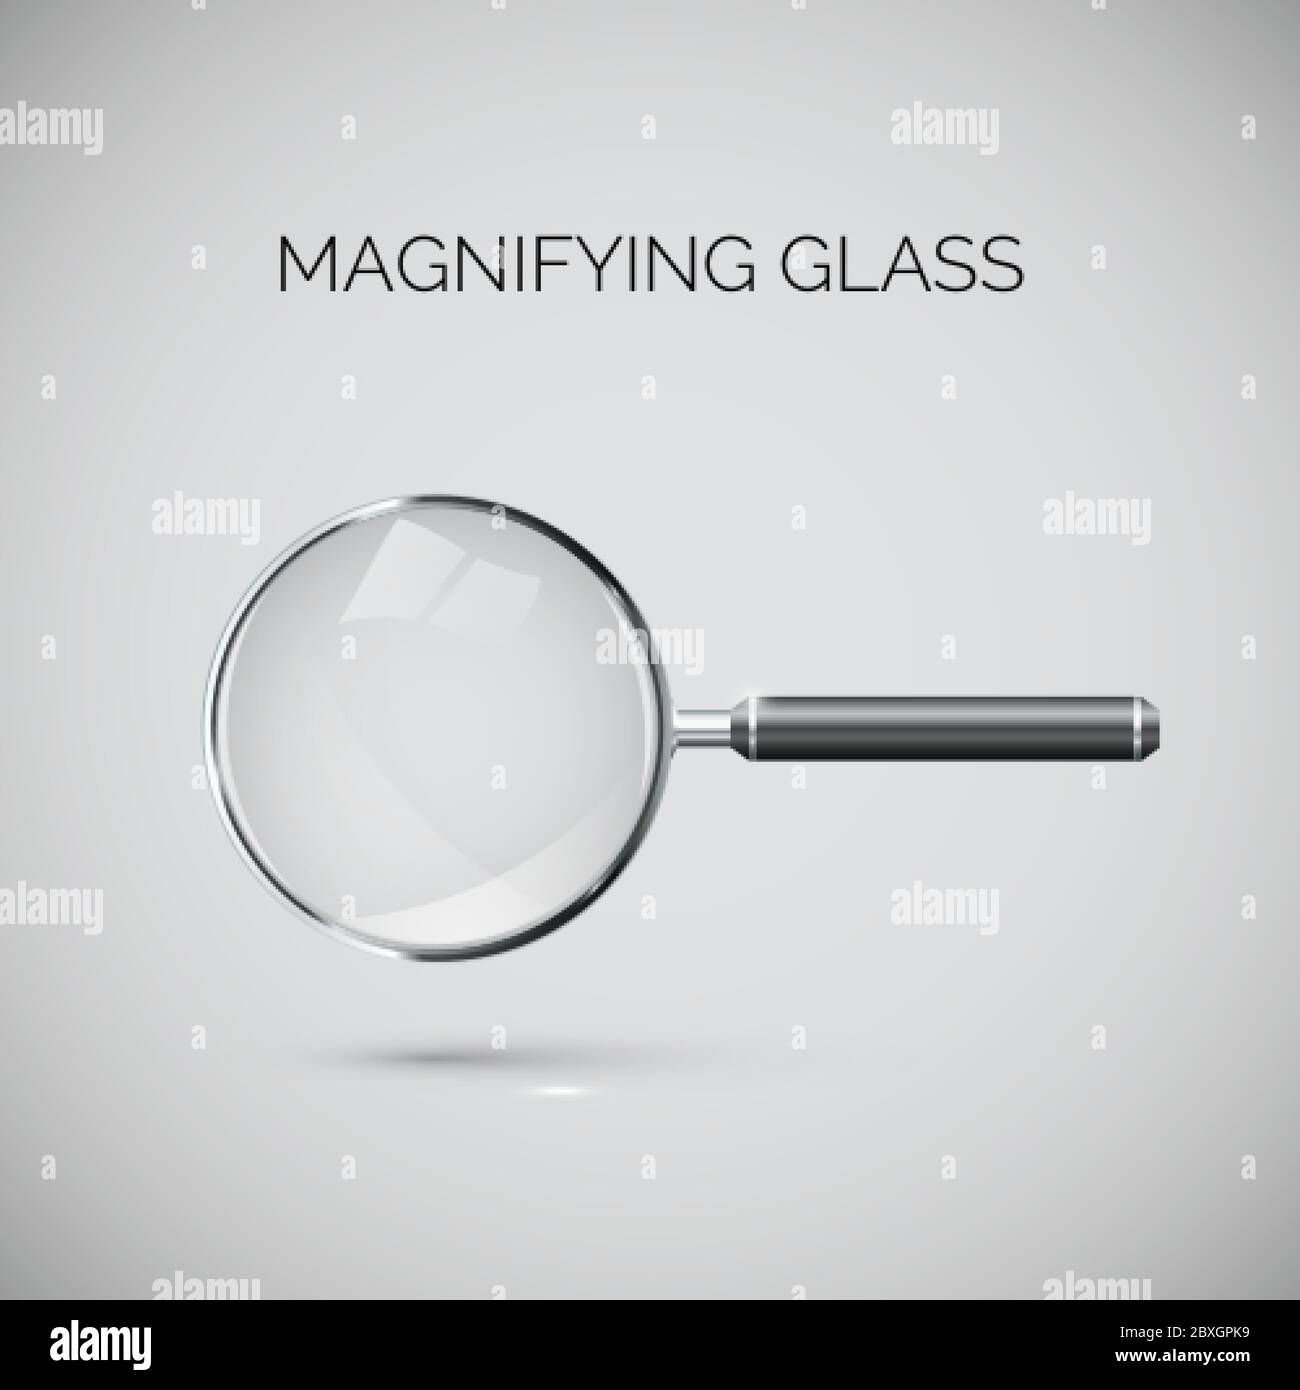 Magnifying glass with metal frame and black handle. Realistic style illustration. Vector Stock Vector